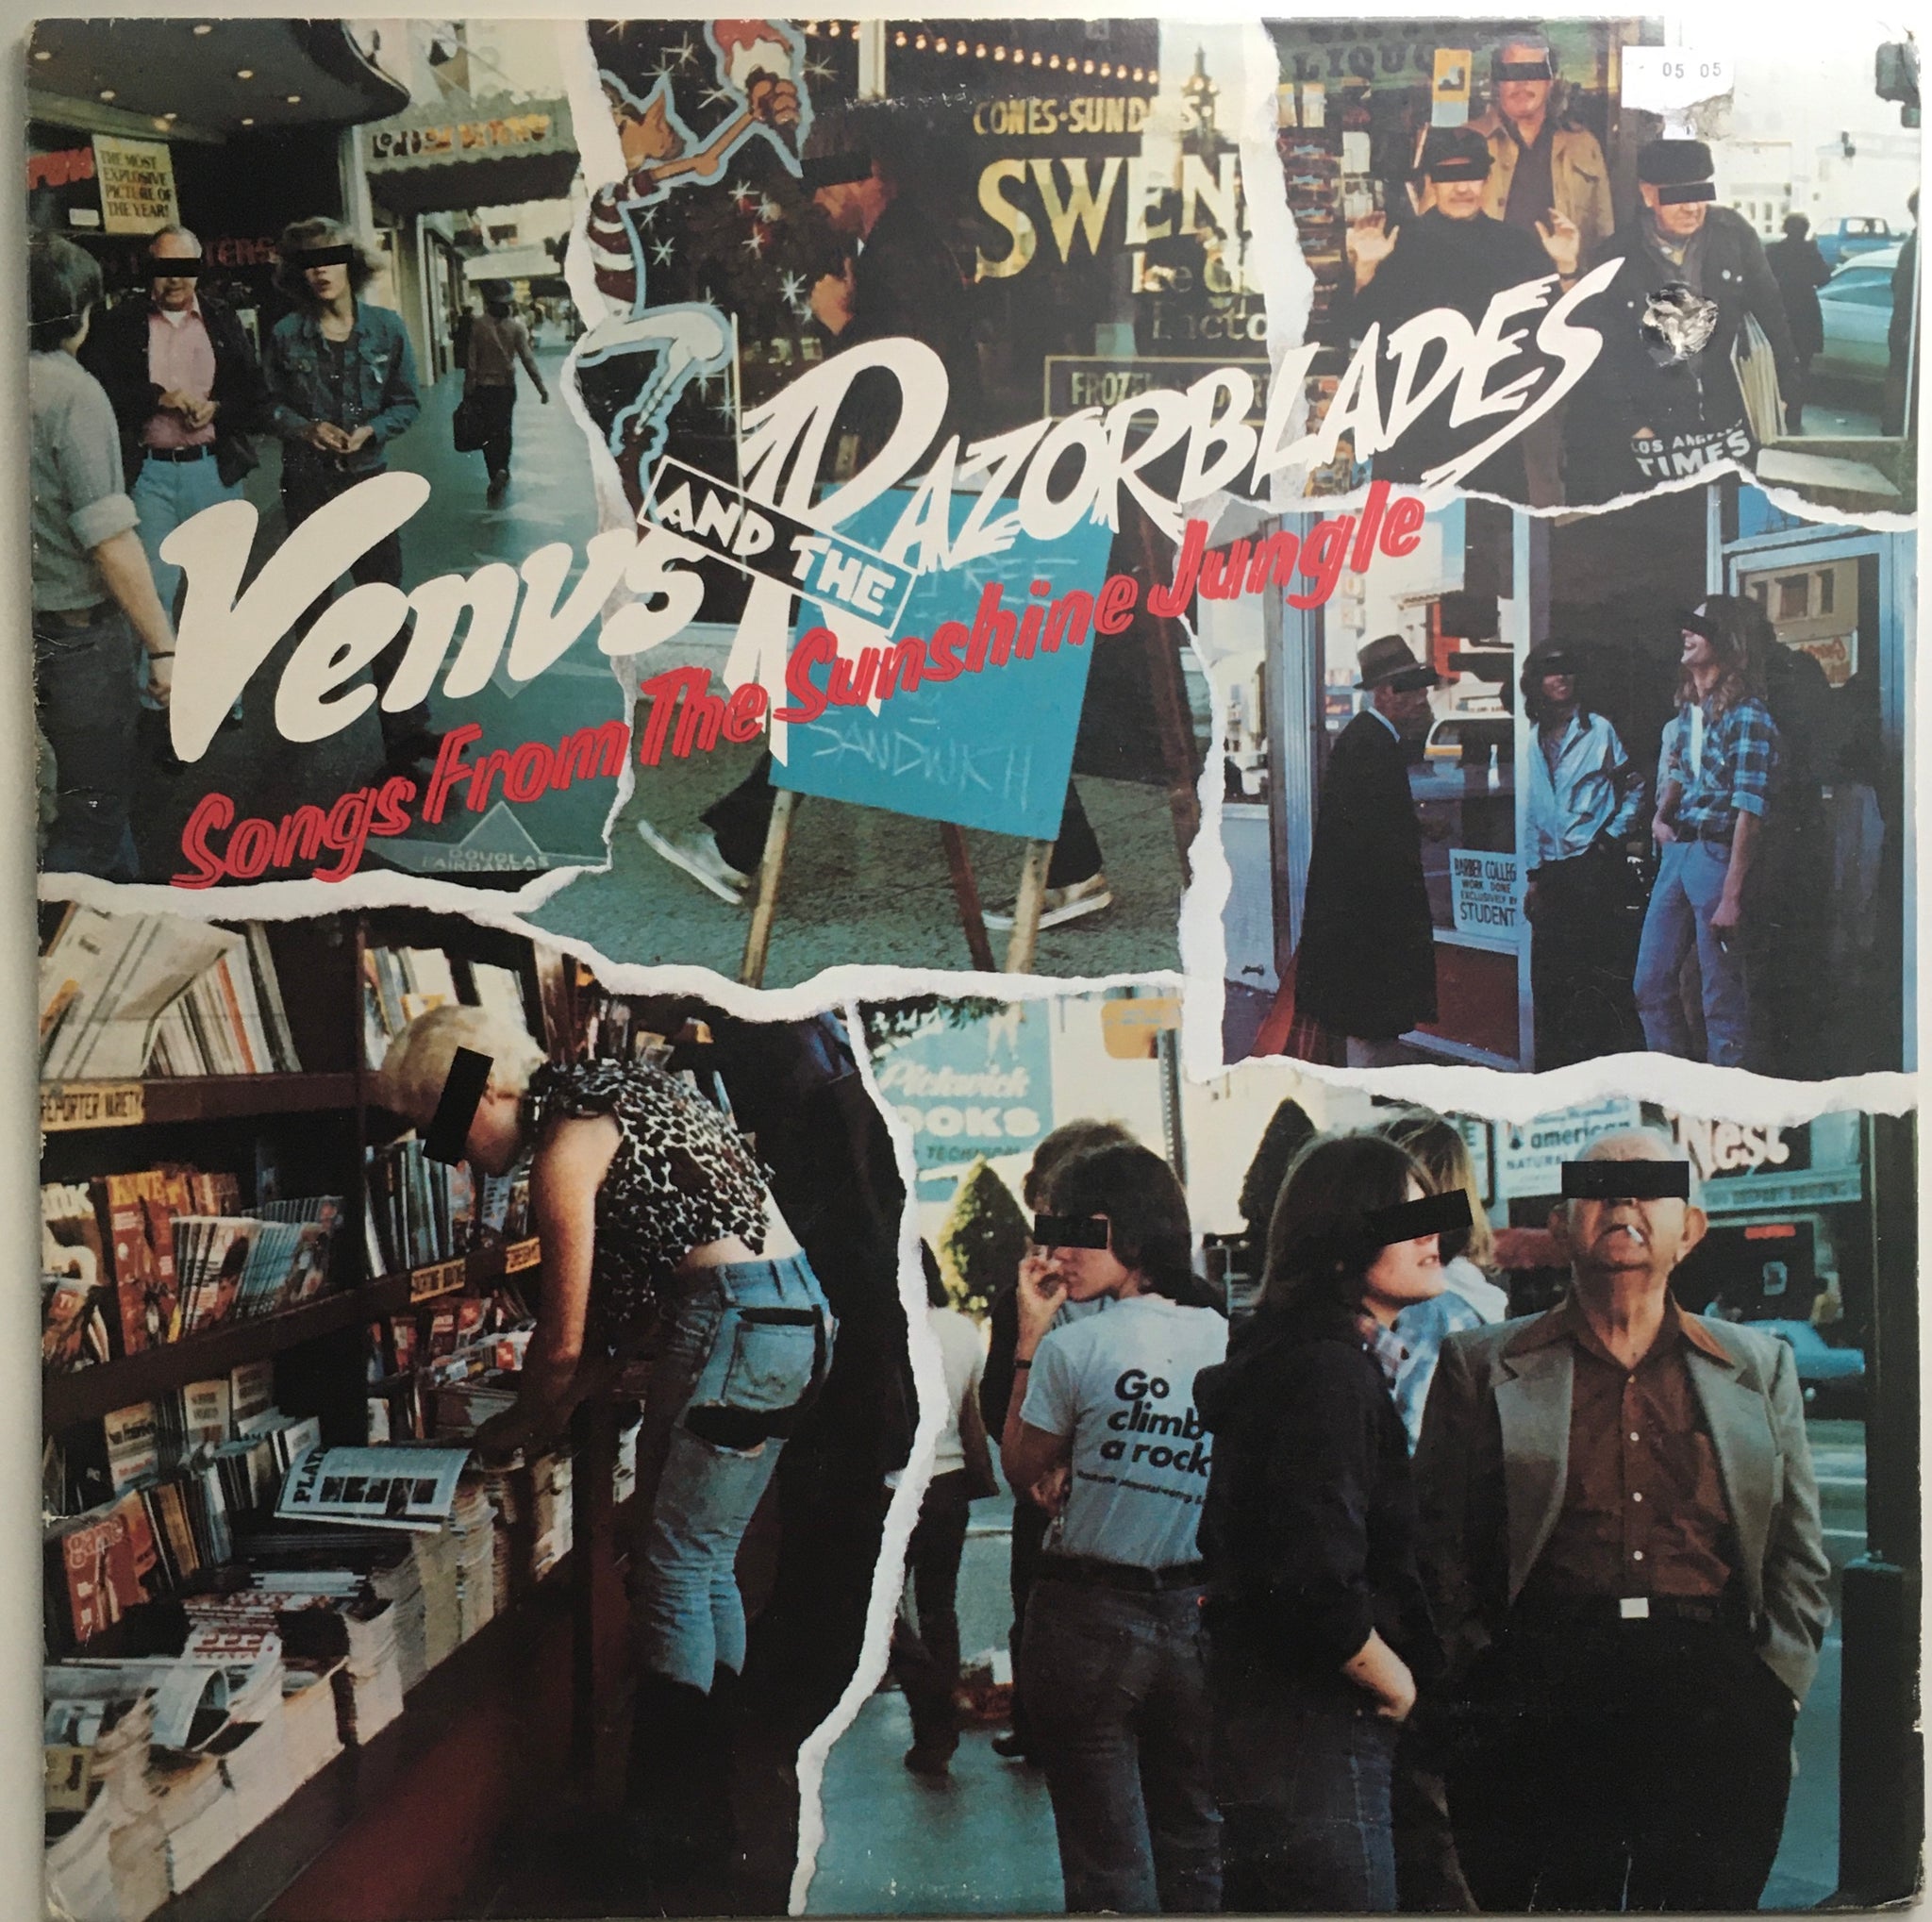 Venus And The Razorblades, "Songs From The Sunshine Jungle" LP (1978). Front cover image. Late 70's LA punk and power-pop.